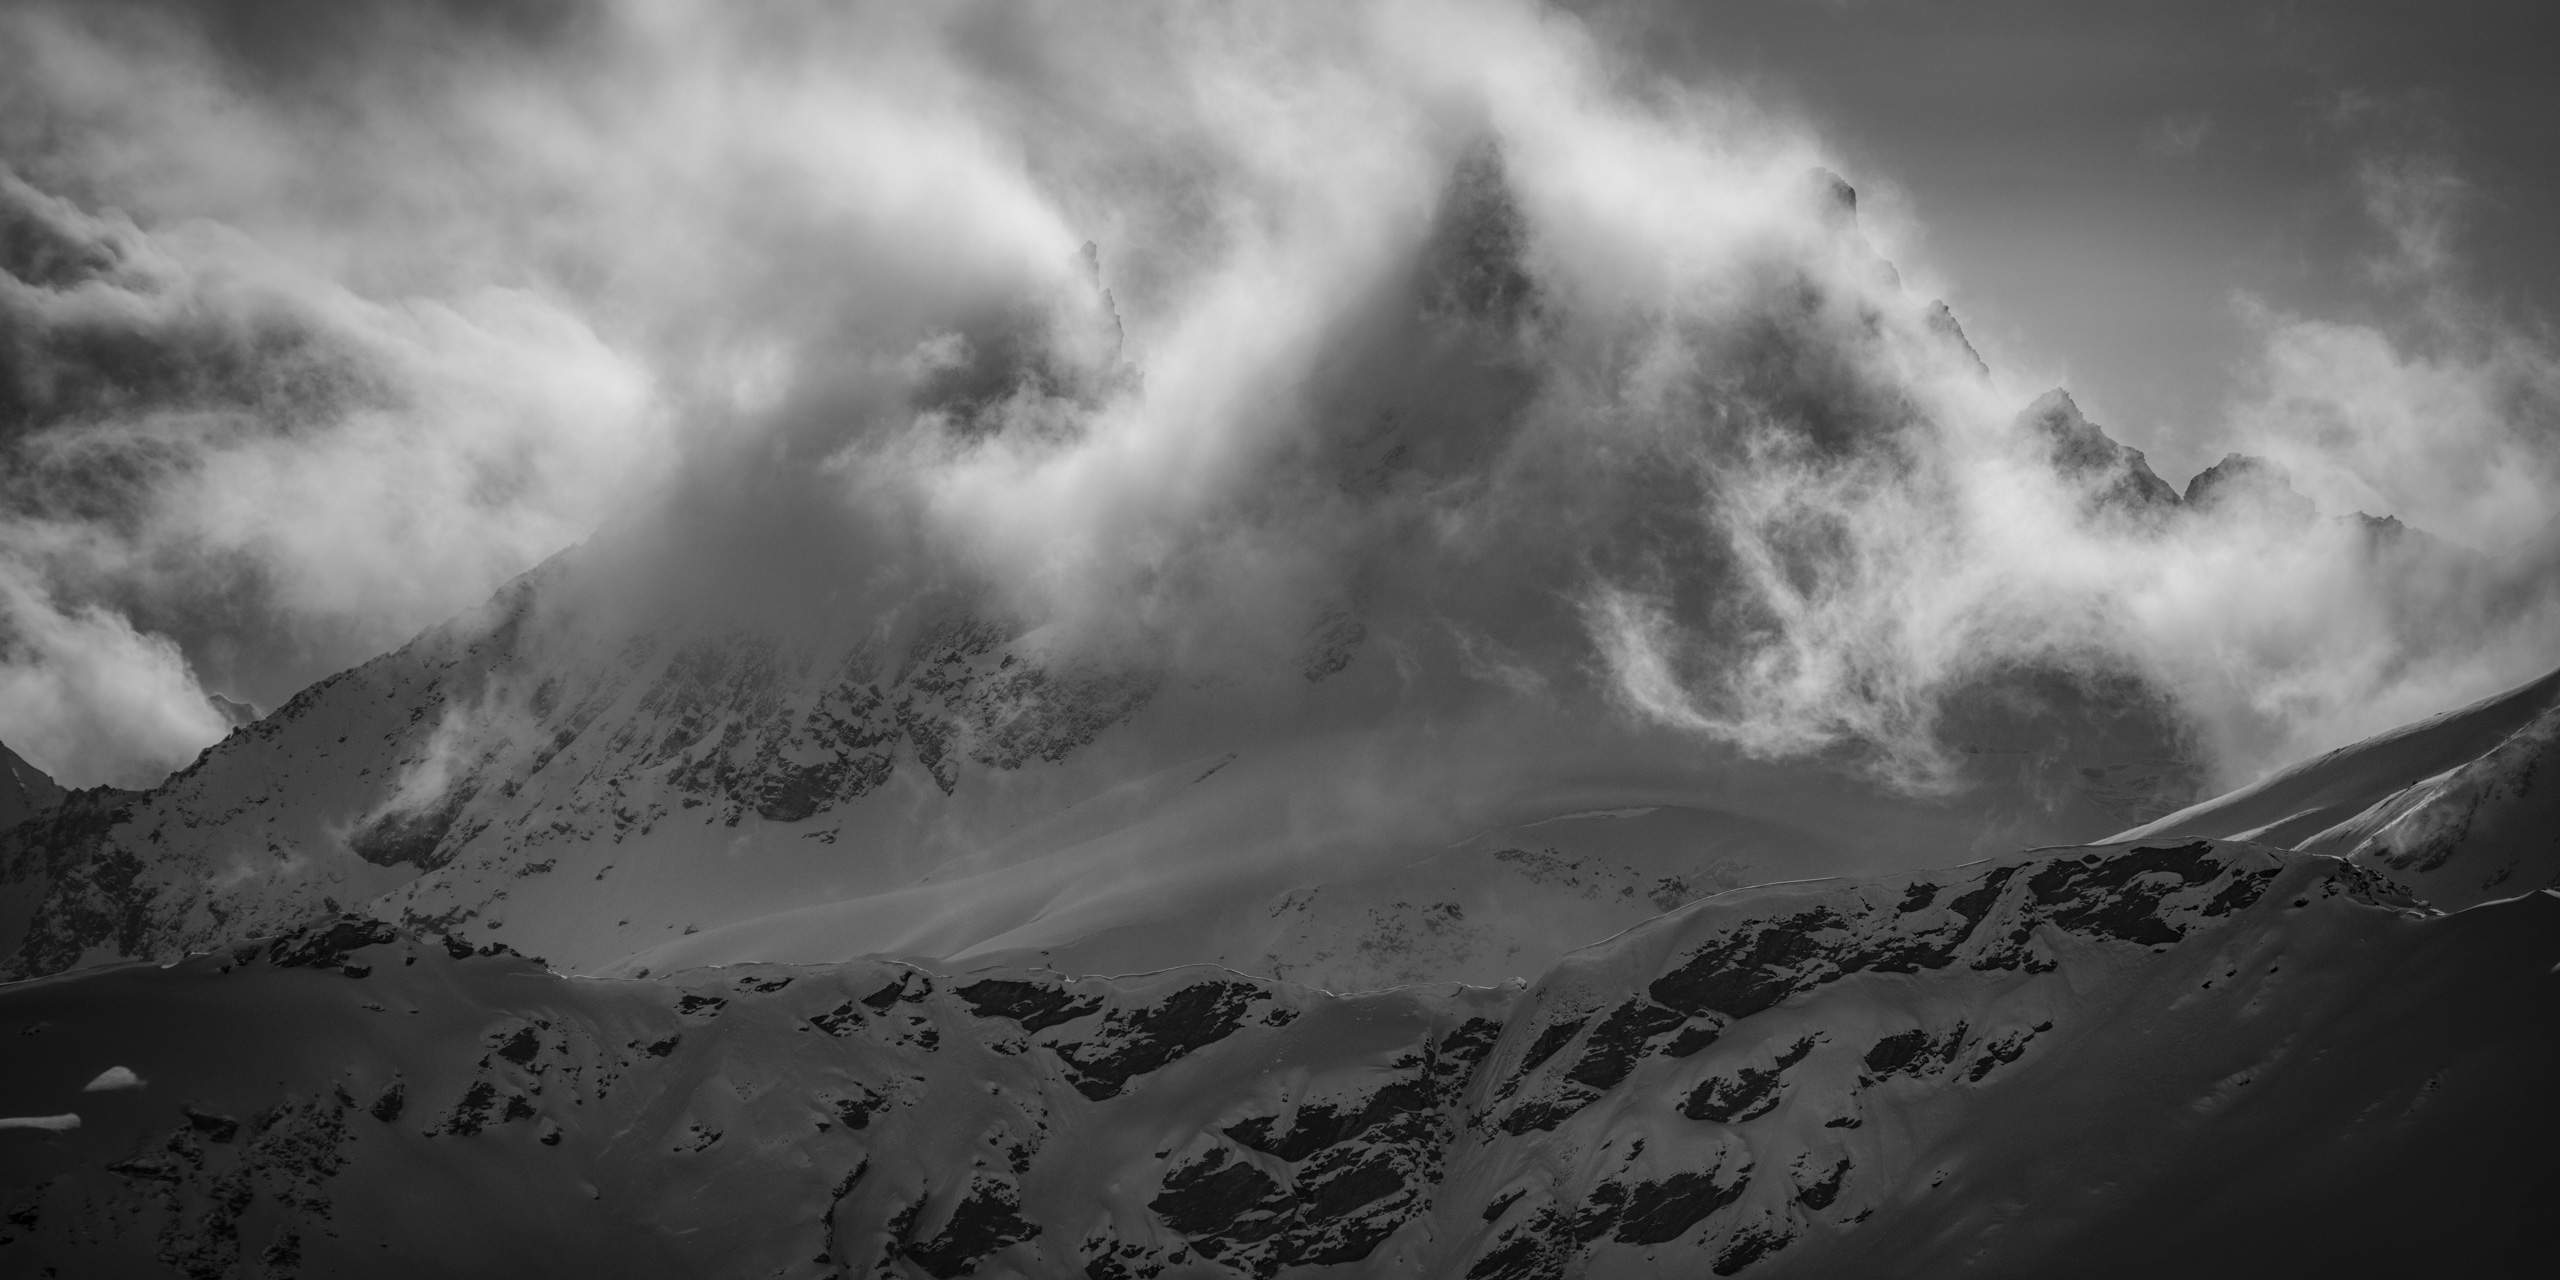 Val d'hérens - Mountain landscape image in black and white